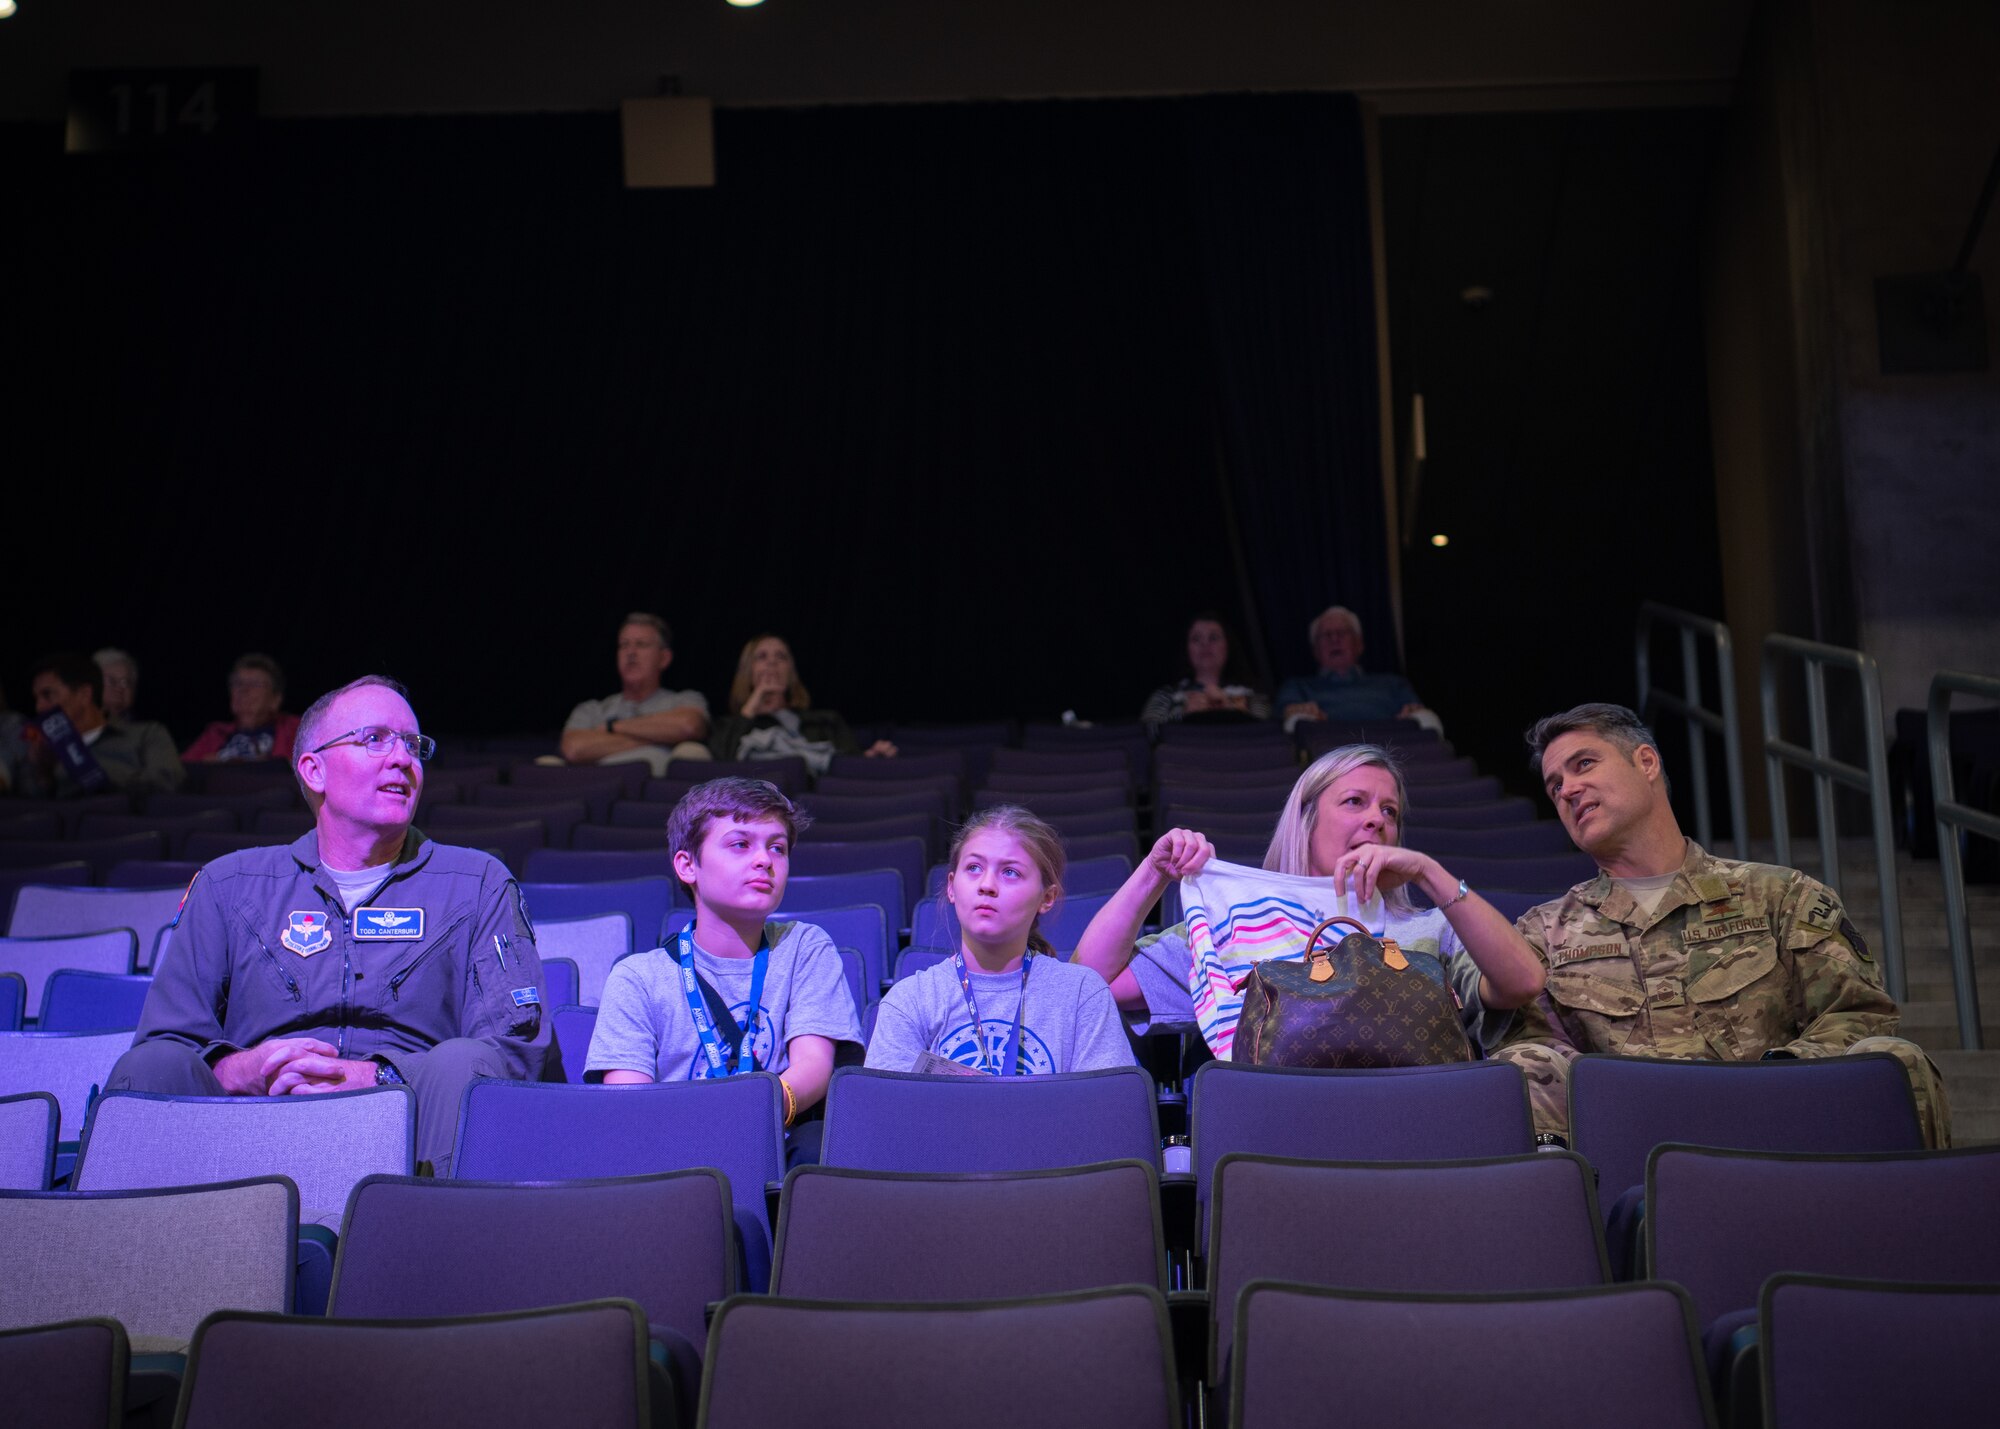 Brig. Gen. Todd Canterbury, 56th Fighter Wing commander and Chief Master Sgt. Ronald Thompson, 56th FW command chief, sit with their families at a Grand Canyon University basketball game, Feb. 27, 2019 in Phoenix, Ariz.